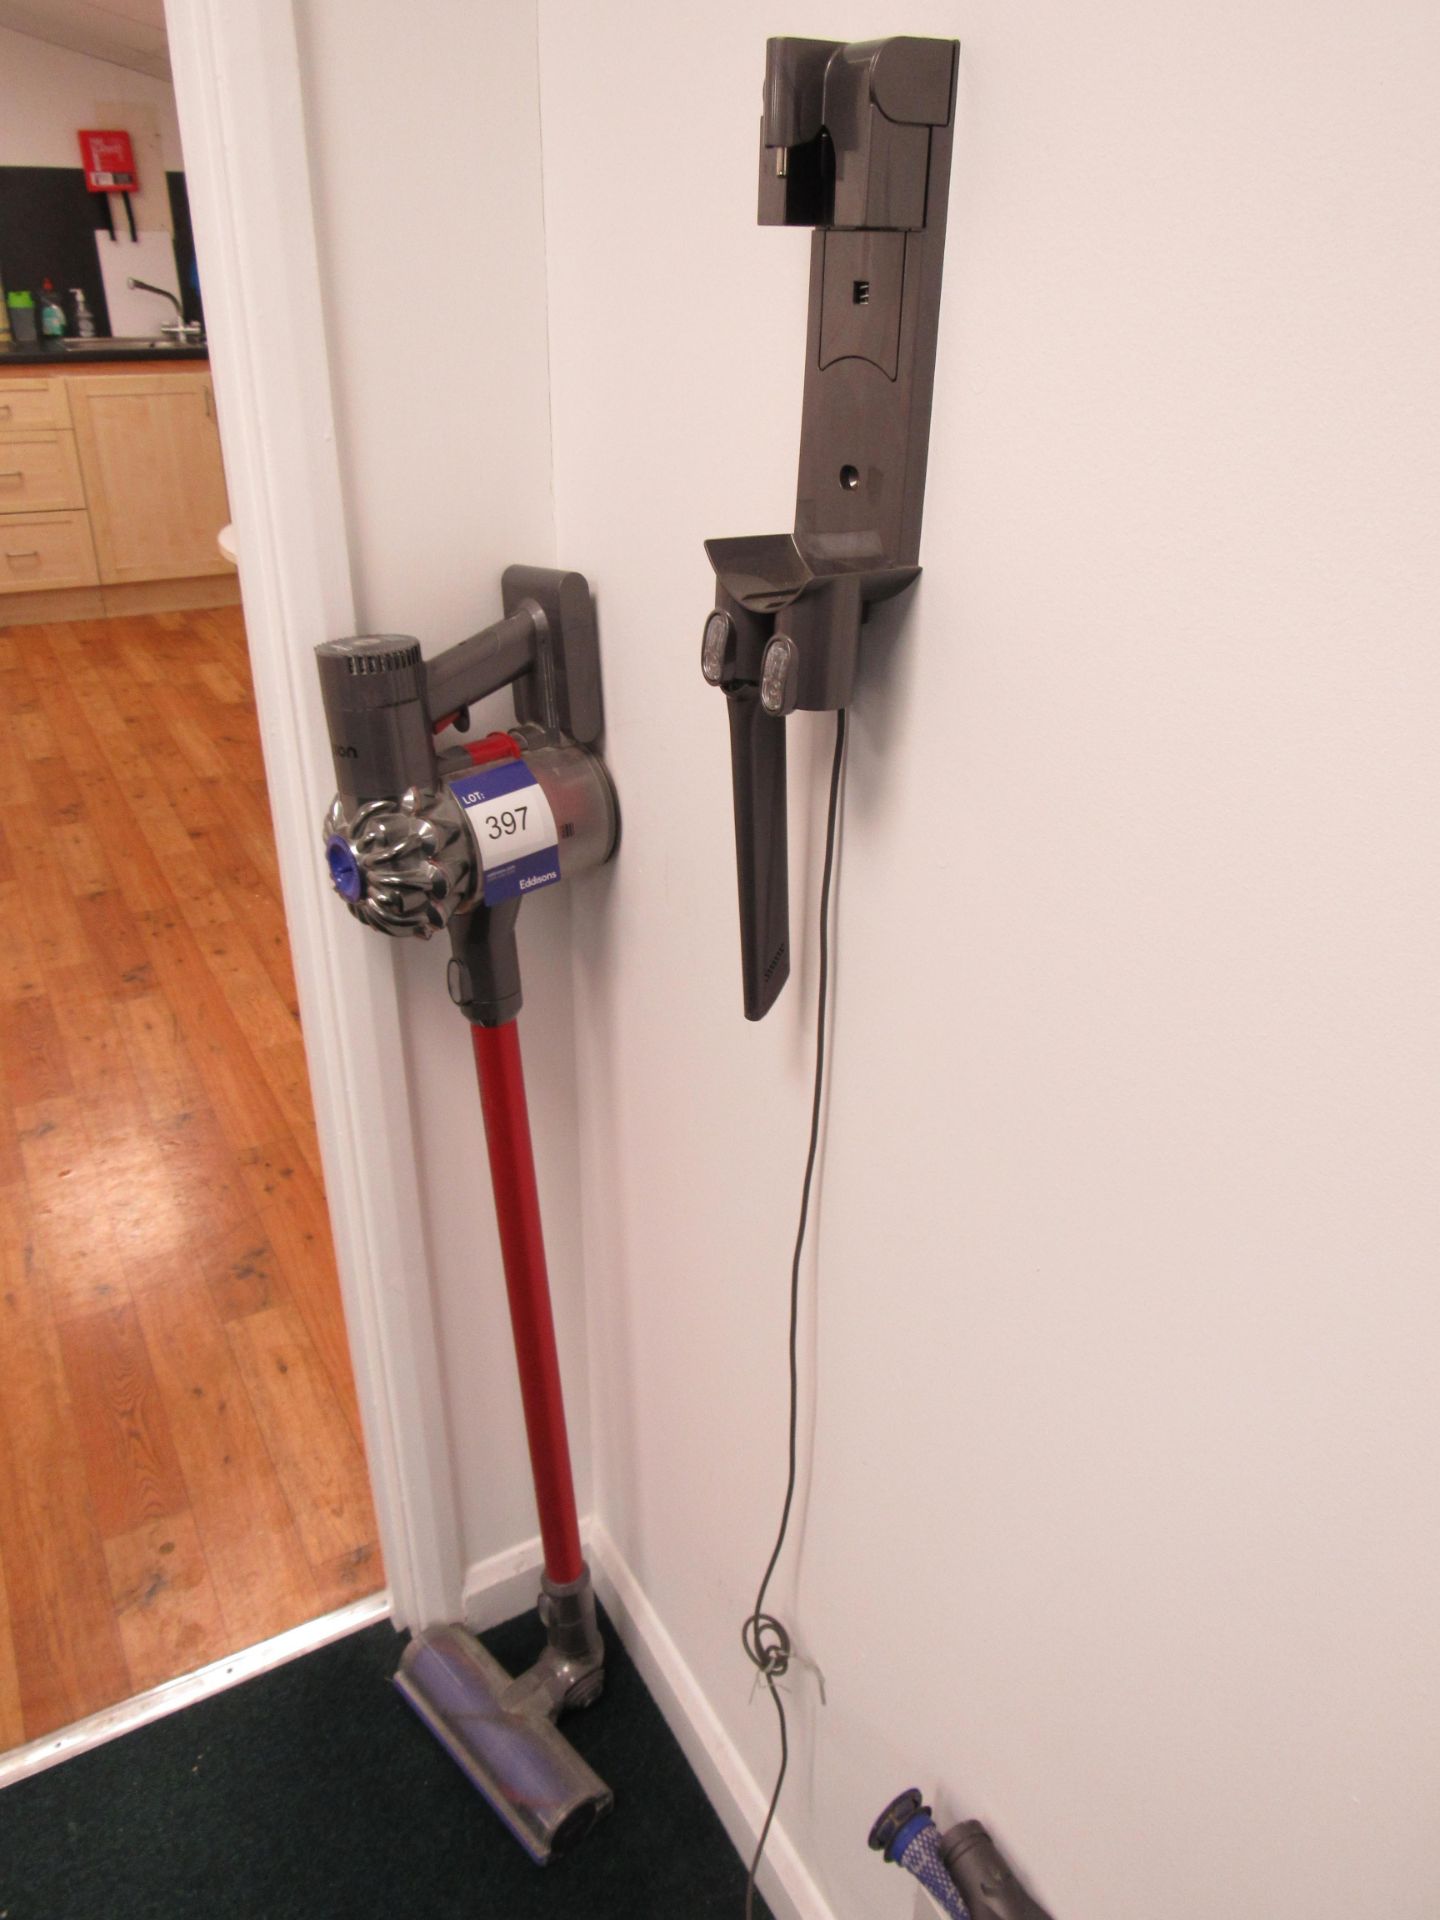 Dyson SV06 hand held total V6 clean vacuum cleaner - Image 2 of 2